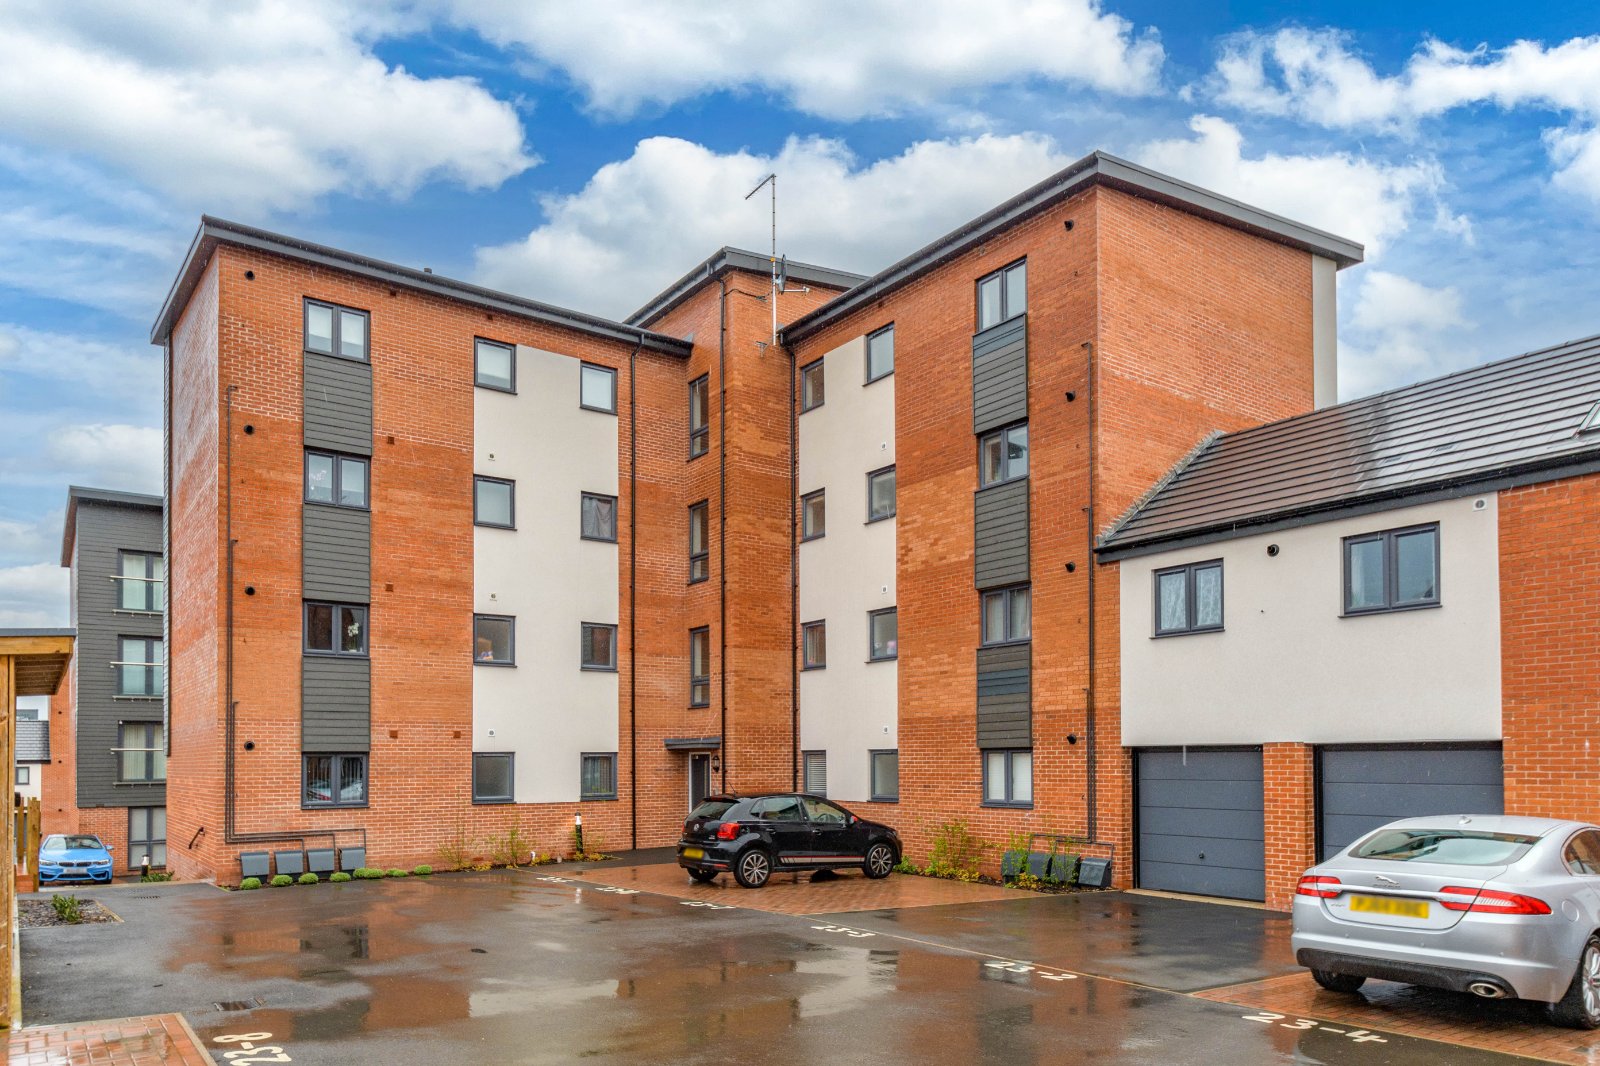 2 bed apartment to rent in Ascot Way, Birmingham - Property Image 1